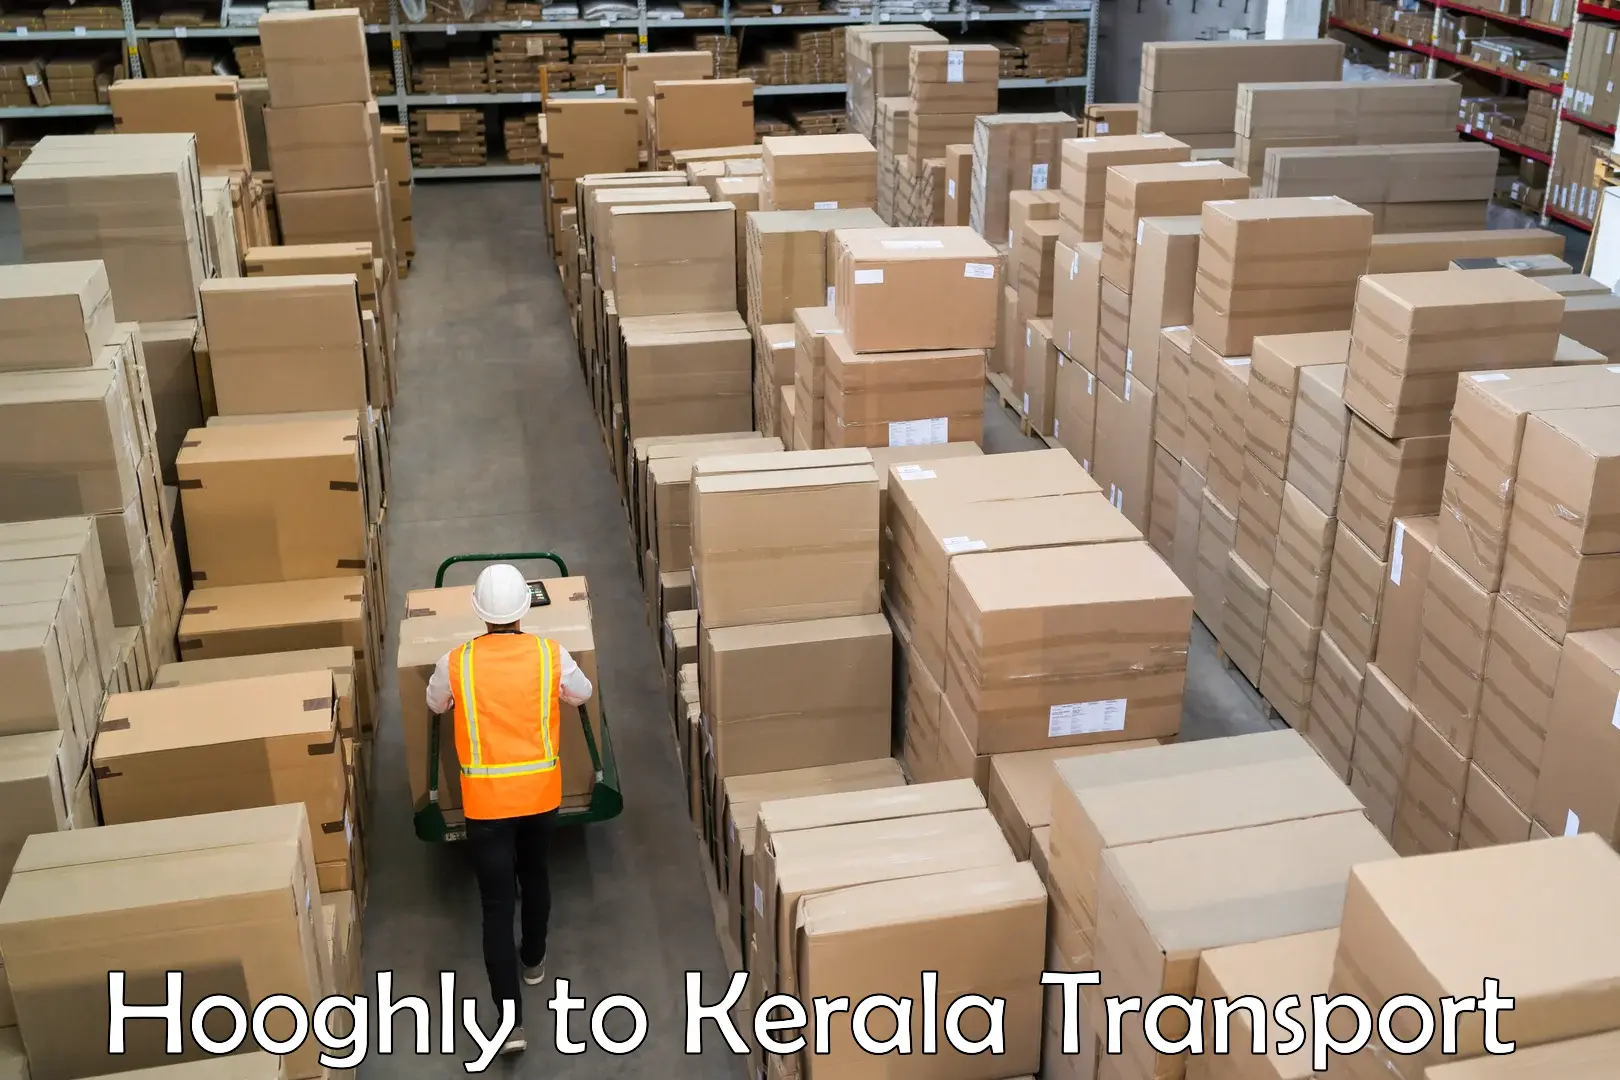 Daily transport service Hooghly to Kalpetta